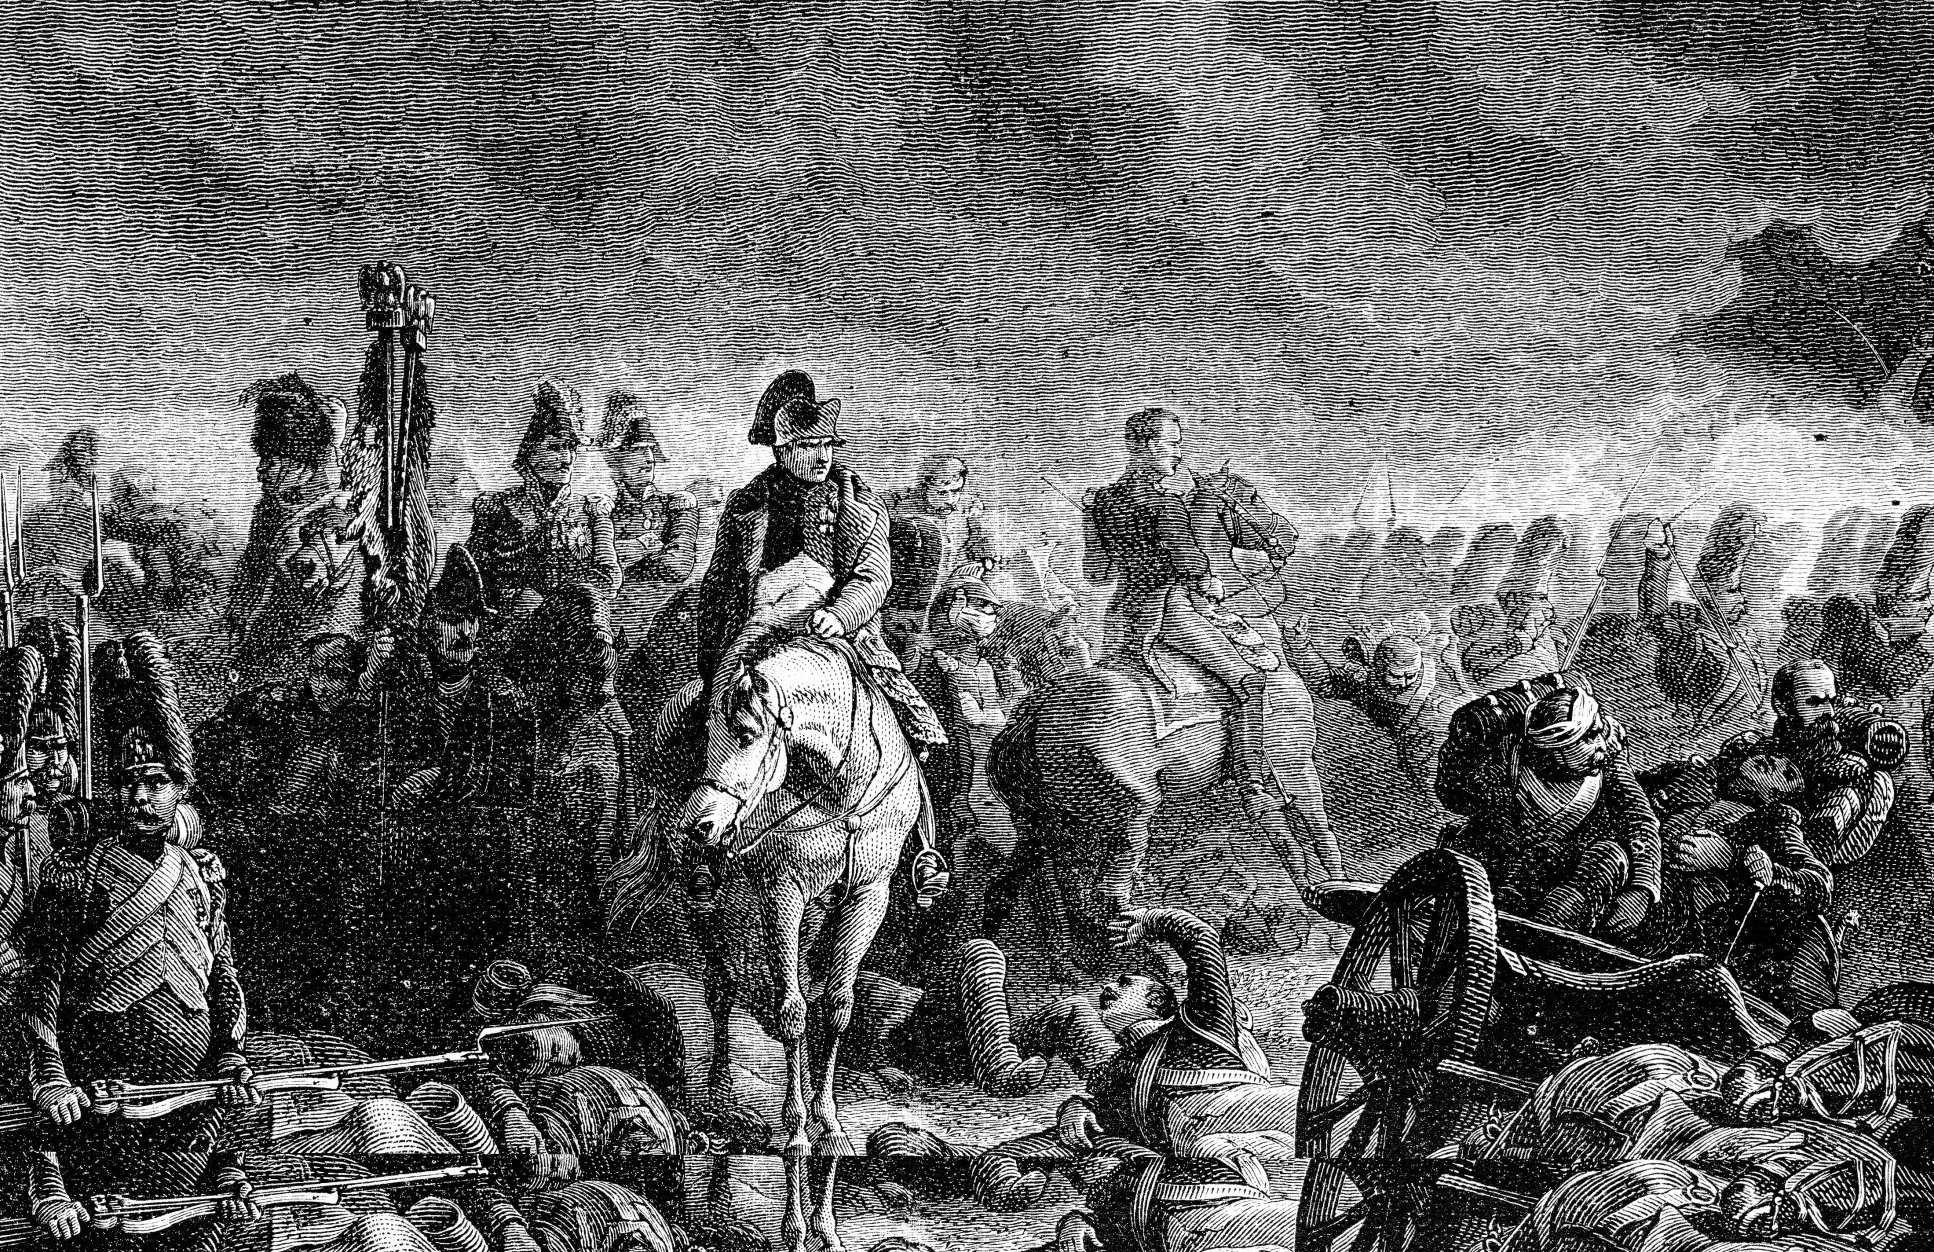 Engraving of soldiers gathering under a cloudy sky